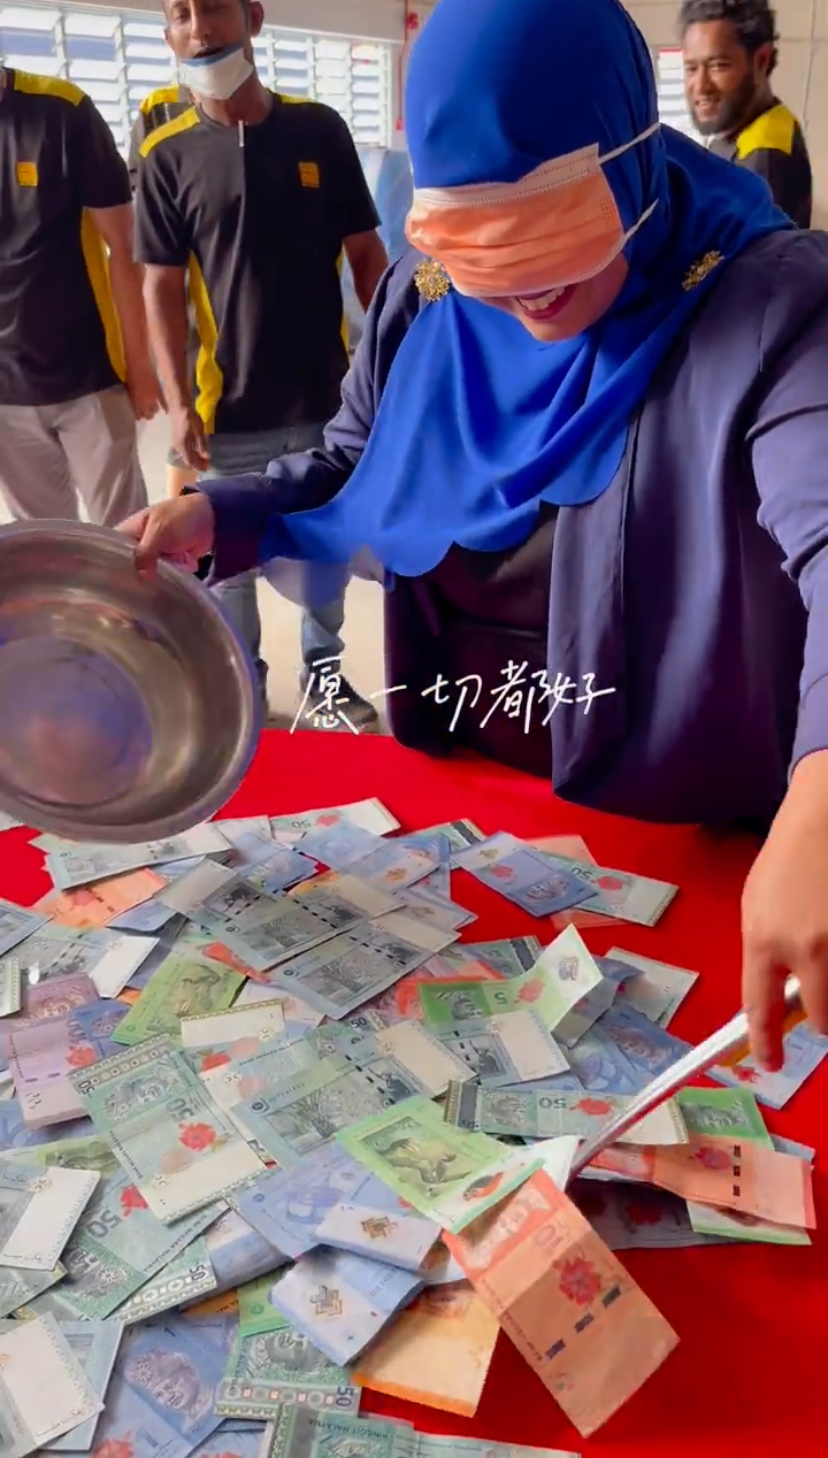 Malaysian stuff blindfolded, ready to scoop some cash on the table for cny